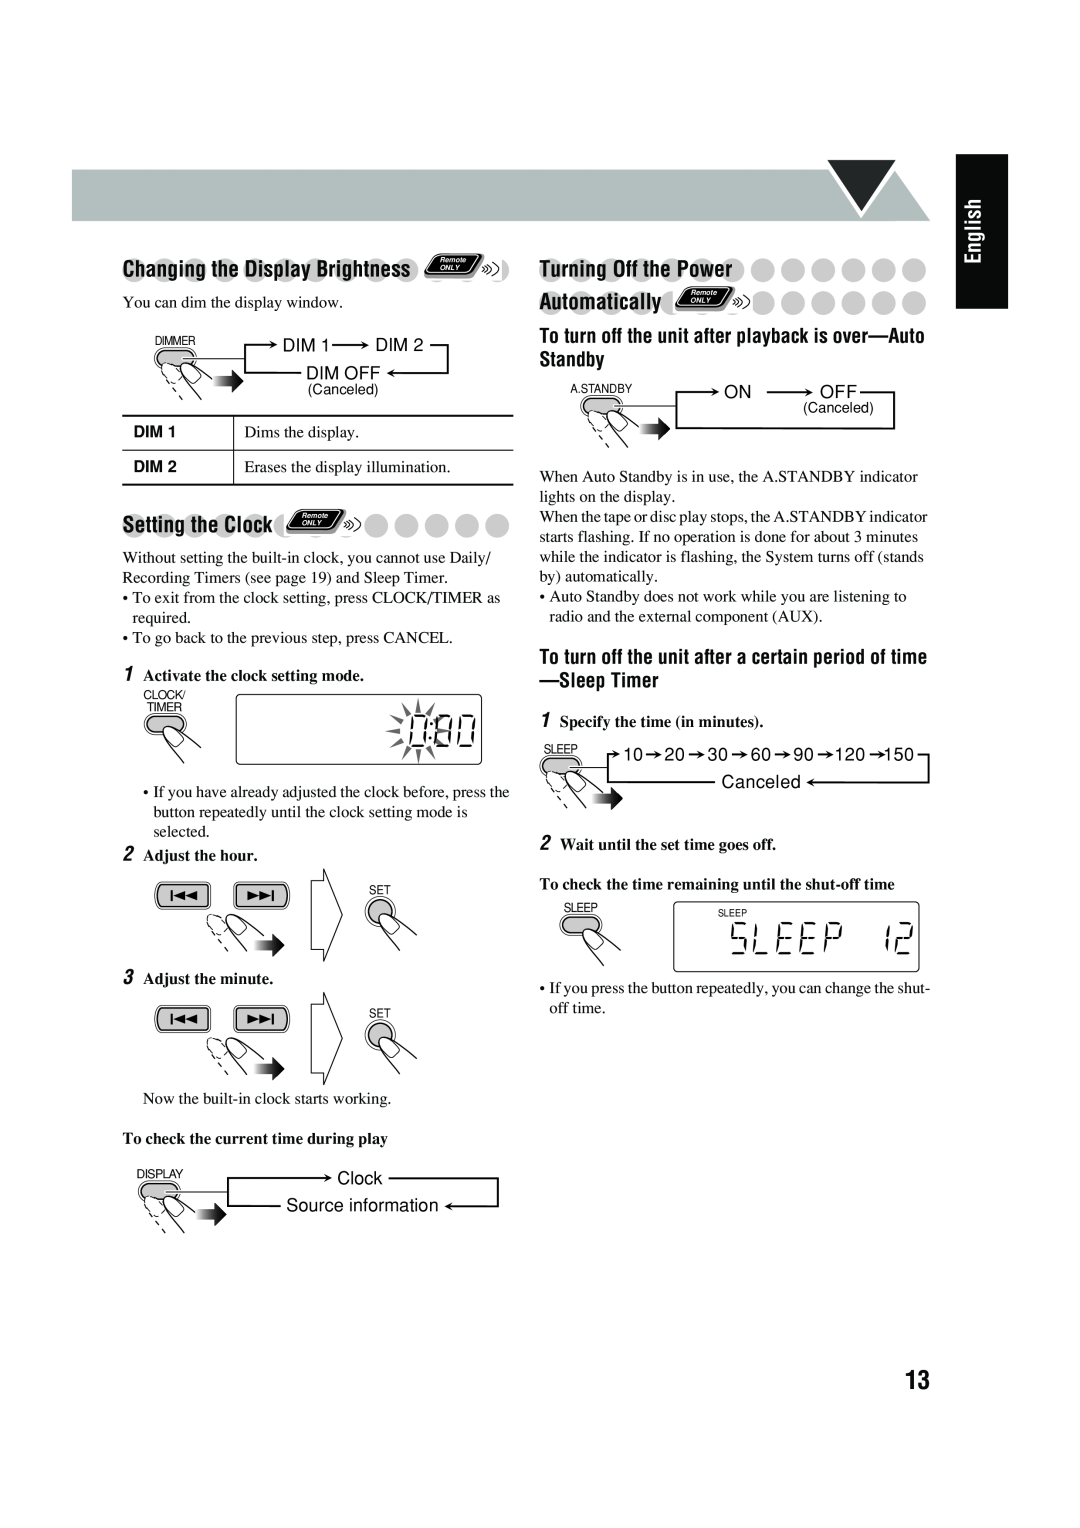 JVC UX-P400 manual Turning Off the Power, Automatically ONLY, English, Changing the Display Brightness, SleepTimer 